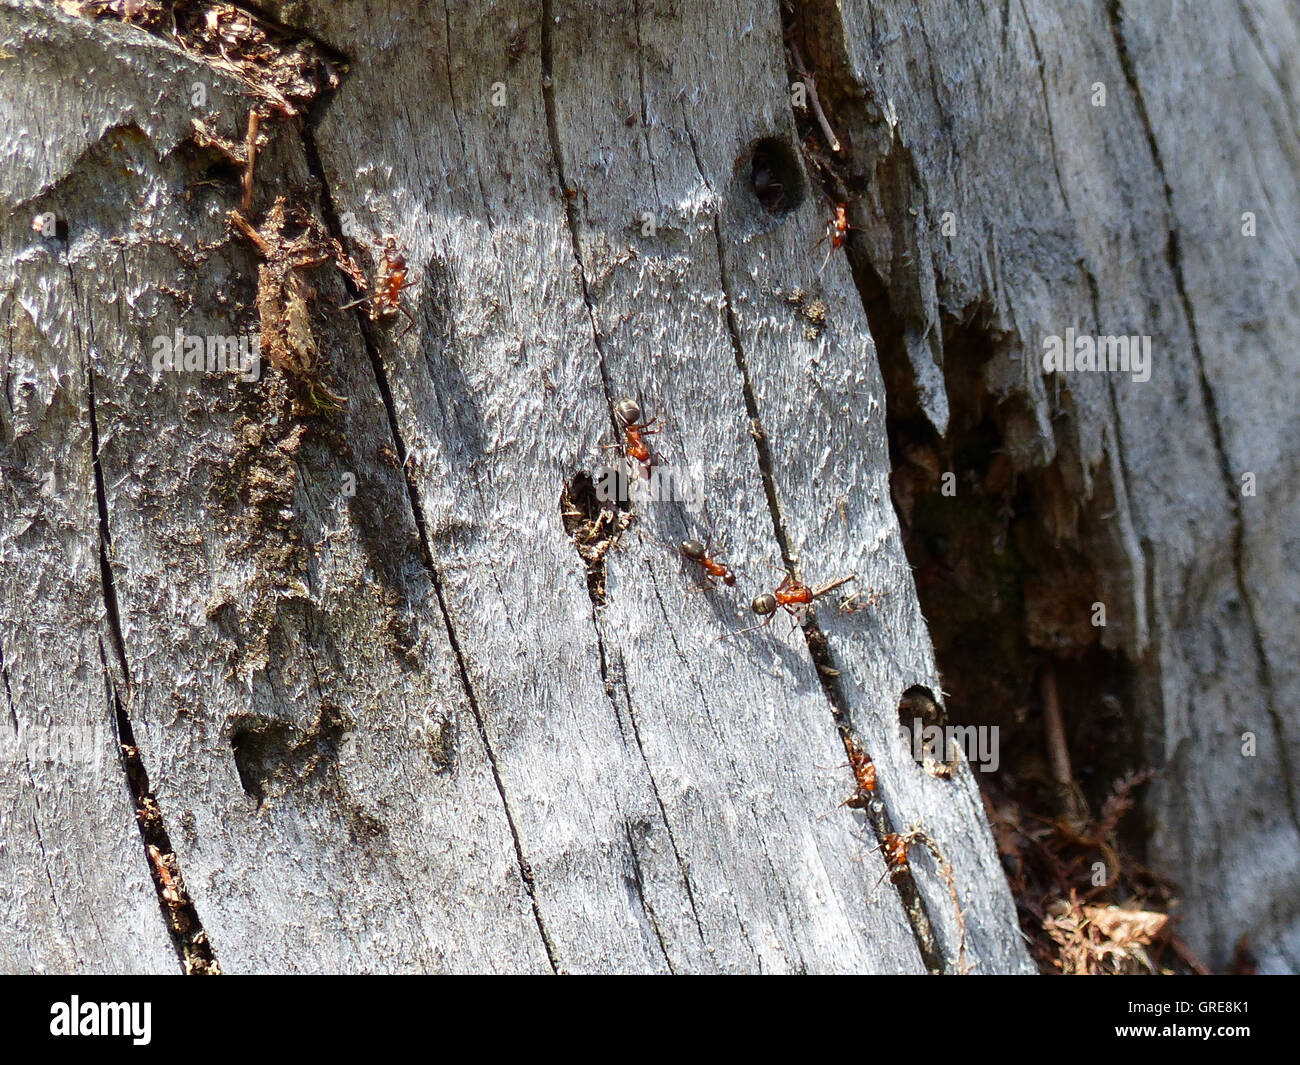 Red Wood Ants On A Tree Stump Stock Photo